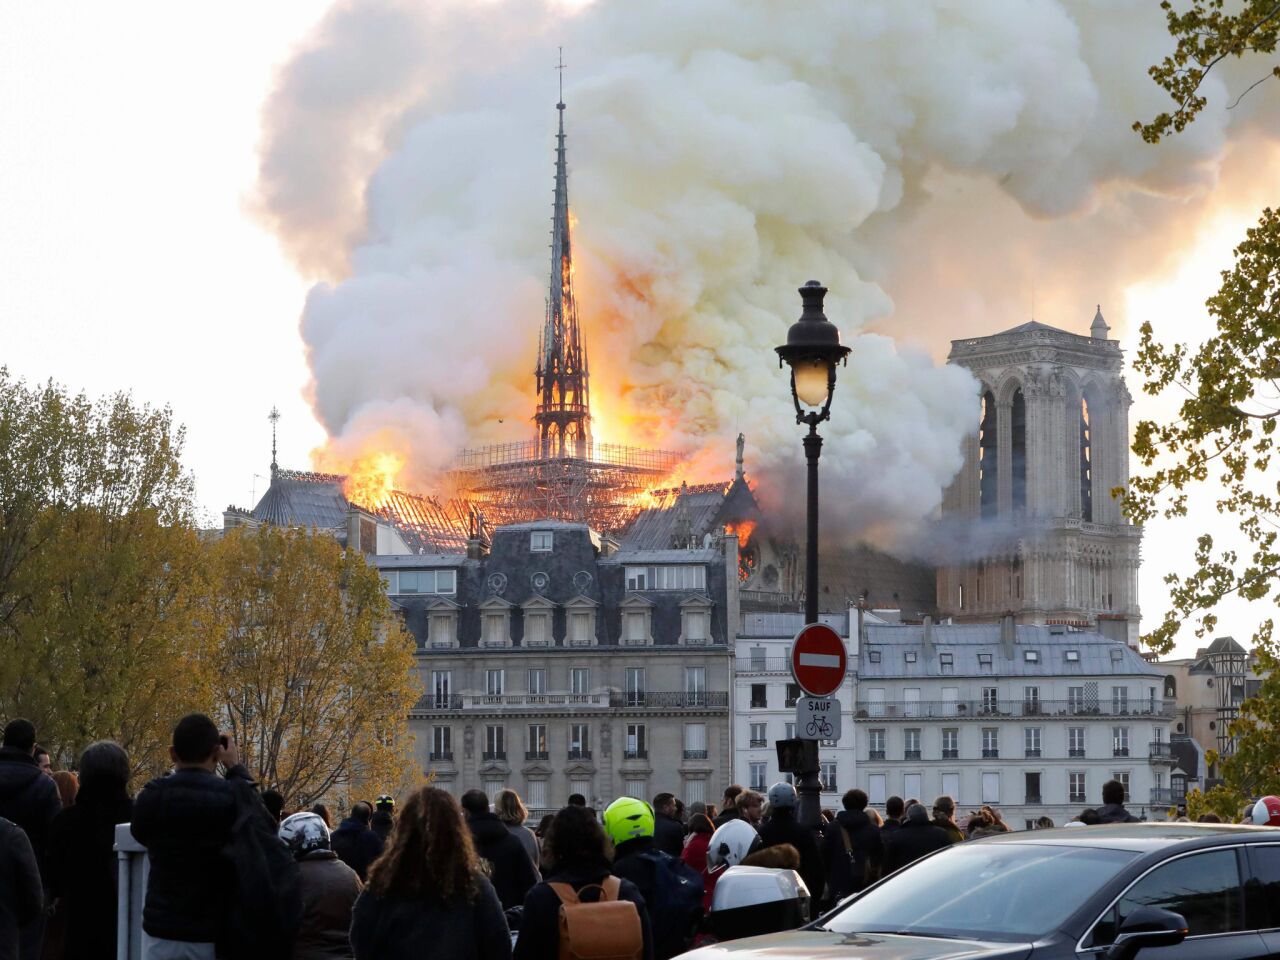 Seen from across the Seine River, smoke and flames rise from the fire at the landmark Notre Dame Cathedral.